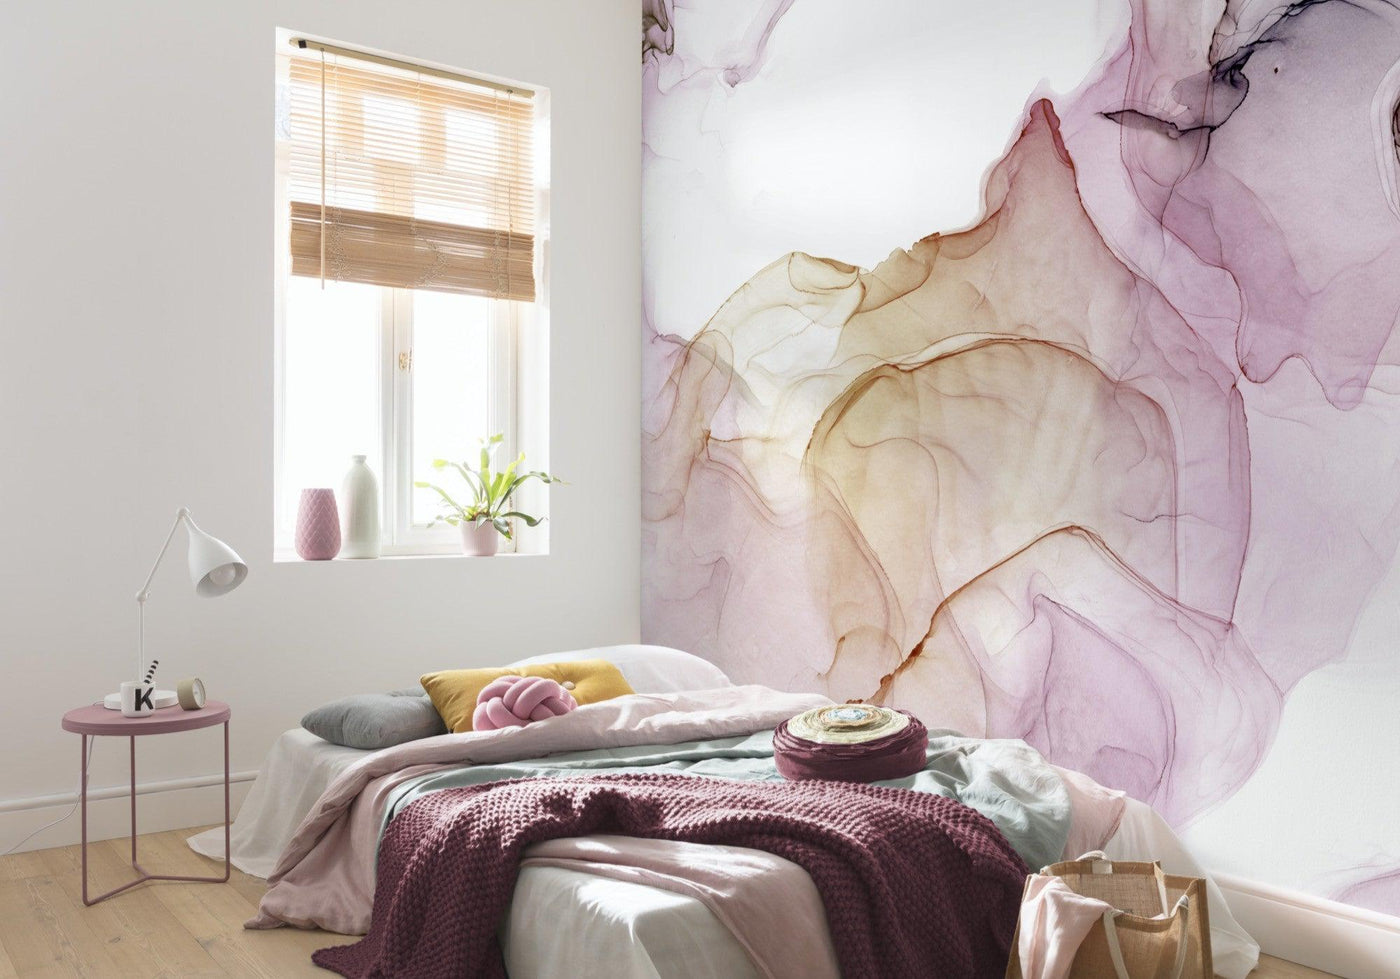 Flow in Rose Mural Wallpaper-Wall Decor-ABSTRACT WALLPAPERS, ART WALLPAPER, ECO MURALS, KIDS WALLPAPERS, MURALS, MURALS / WALLPAPERS, NON-WOVEN WALLPAPER-Forest Homes-Nature inspired decor-Nature decor